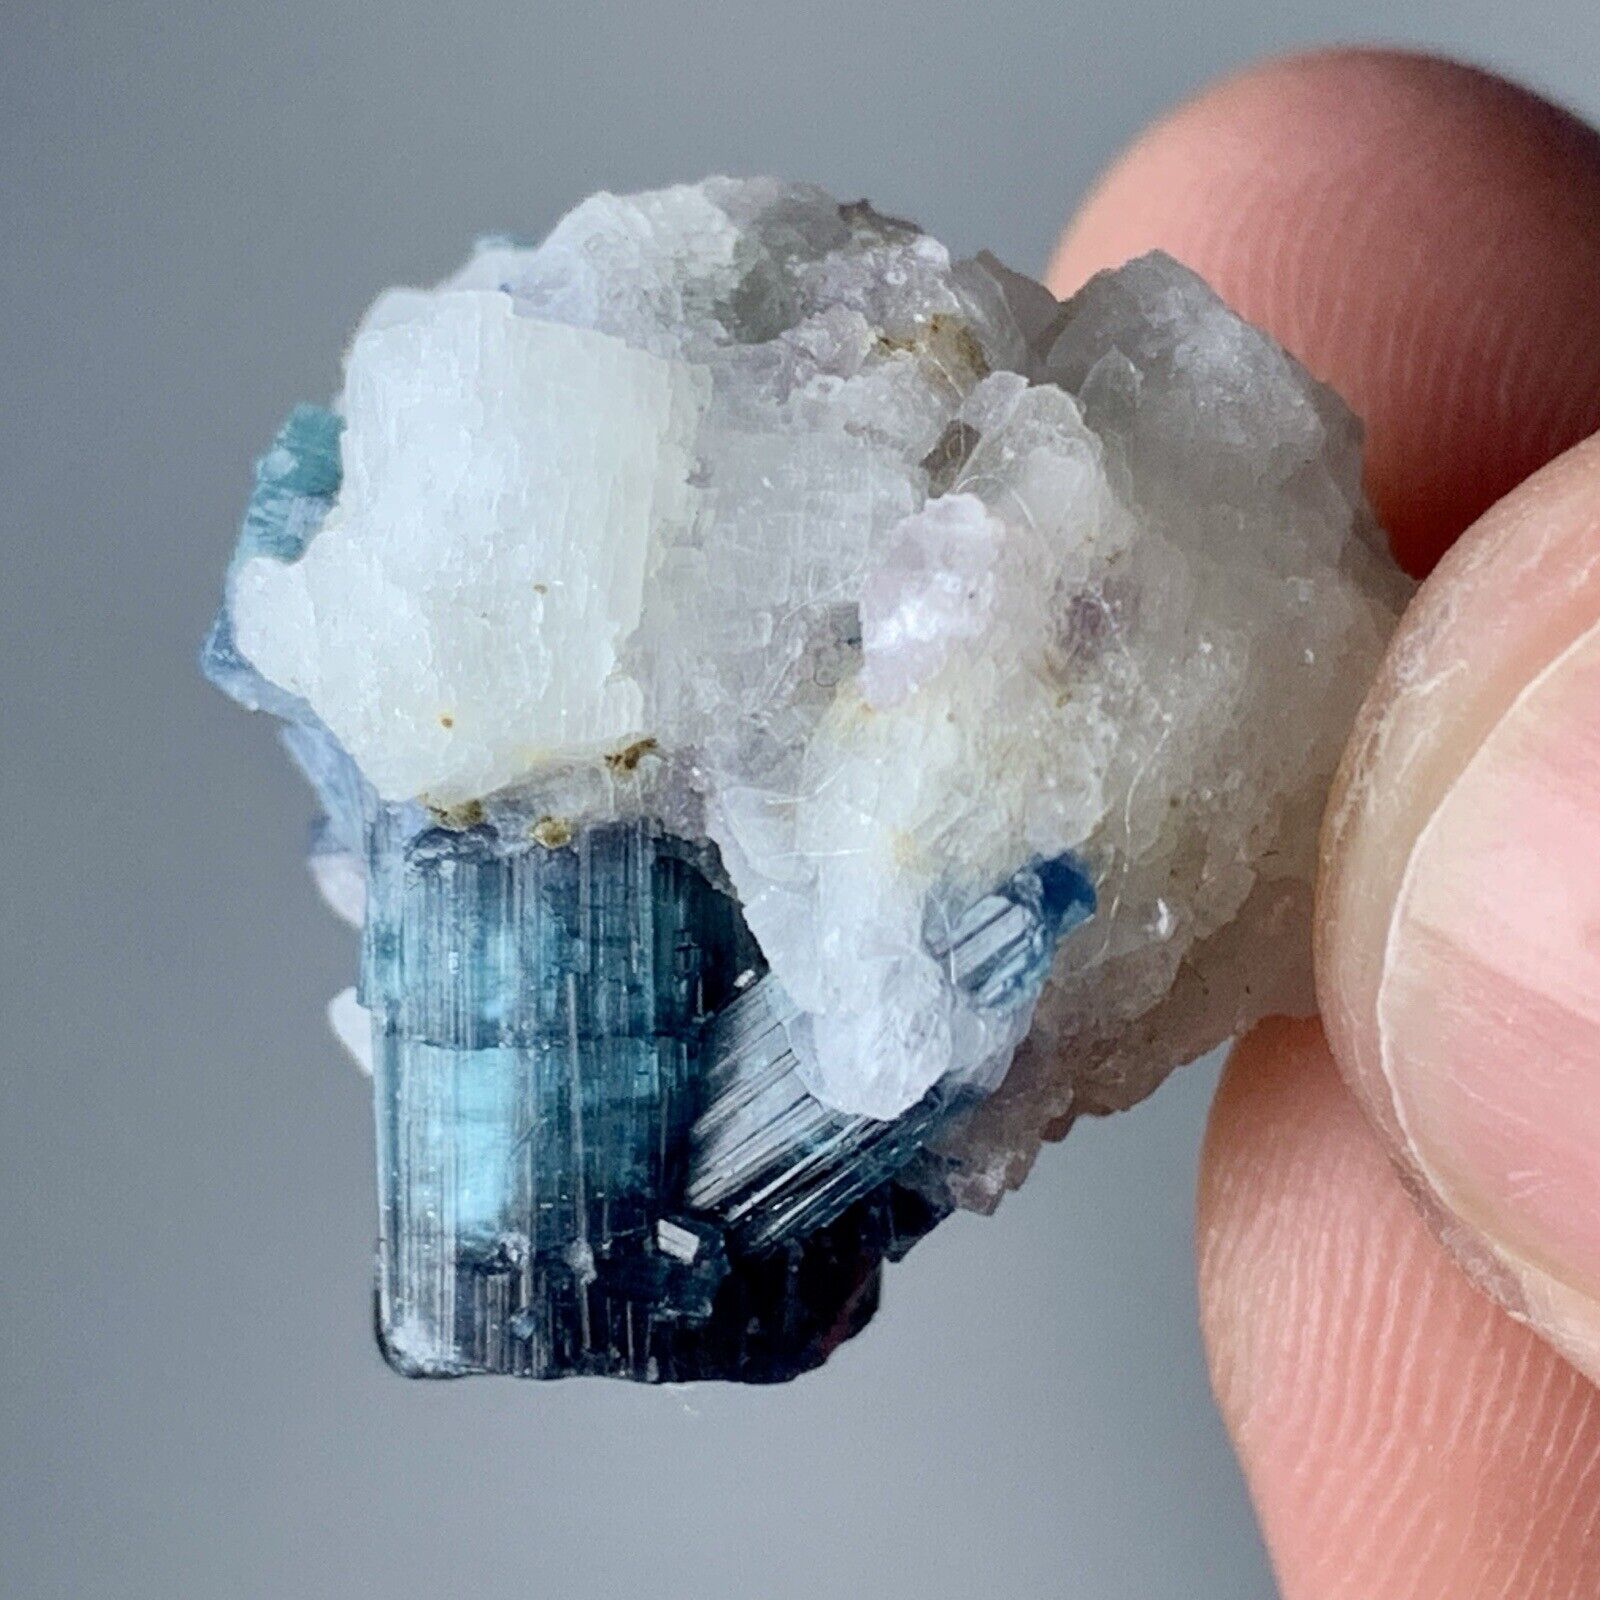 40 Carat Indicolite Colour Tourmaline Crystal With Specimen From Afghanistan